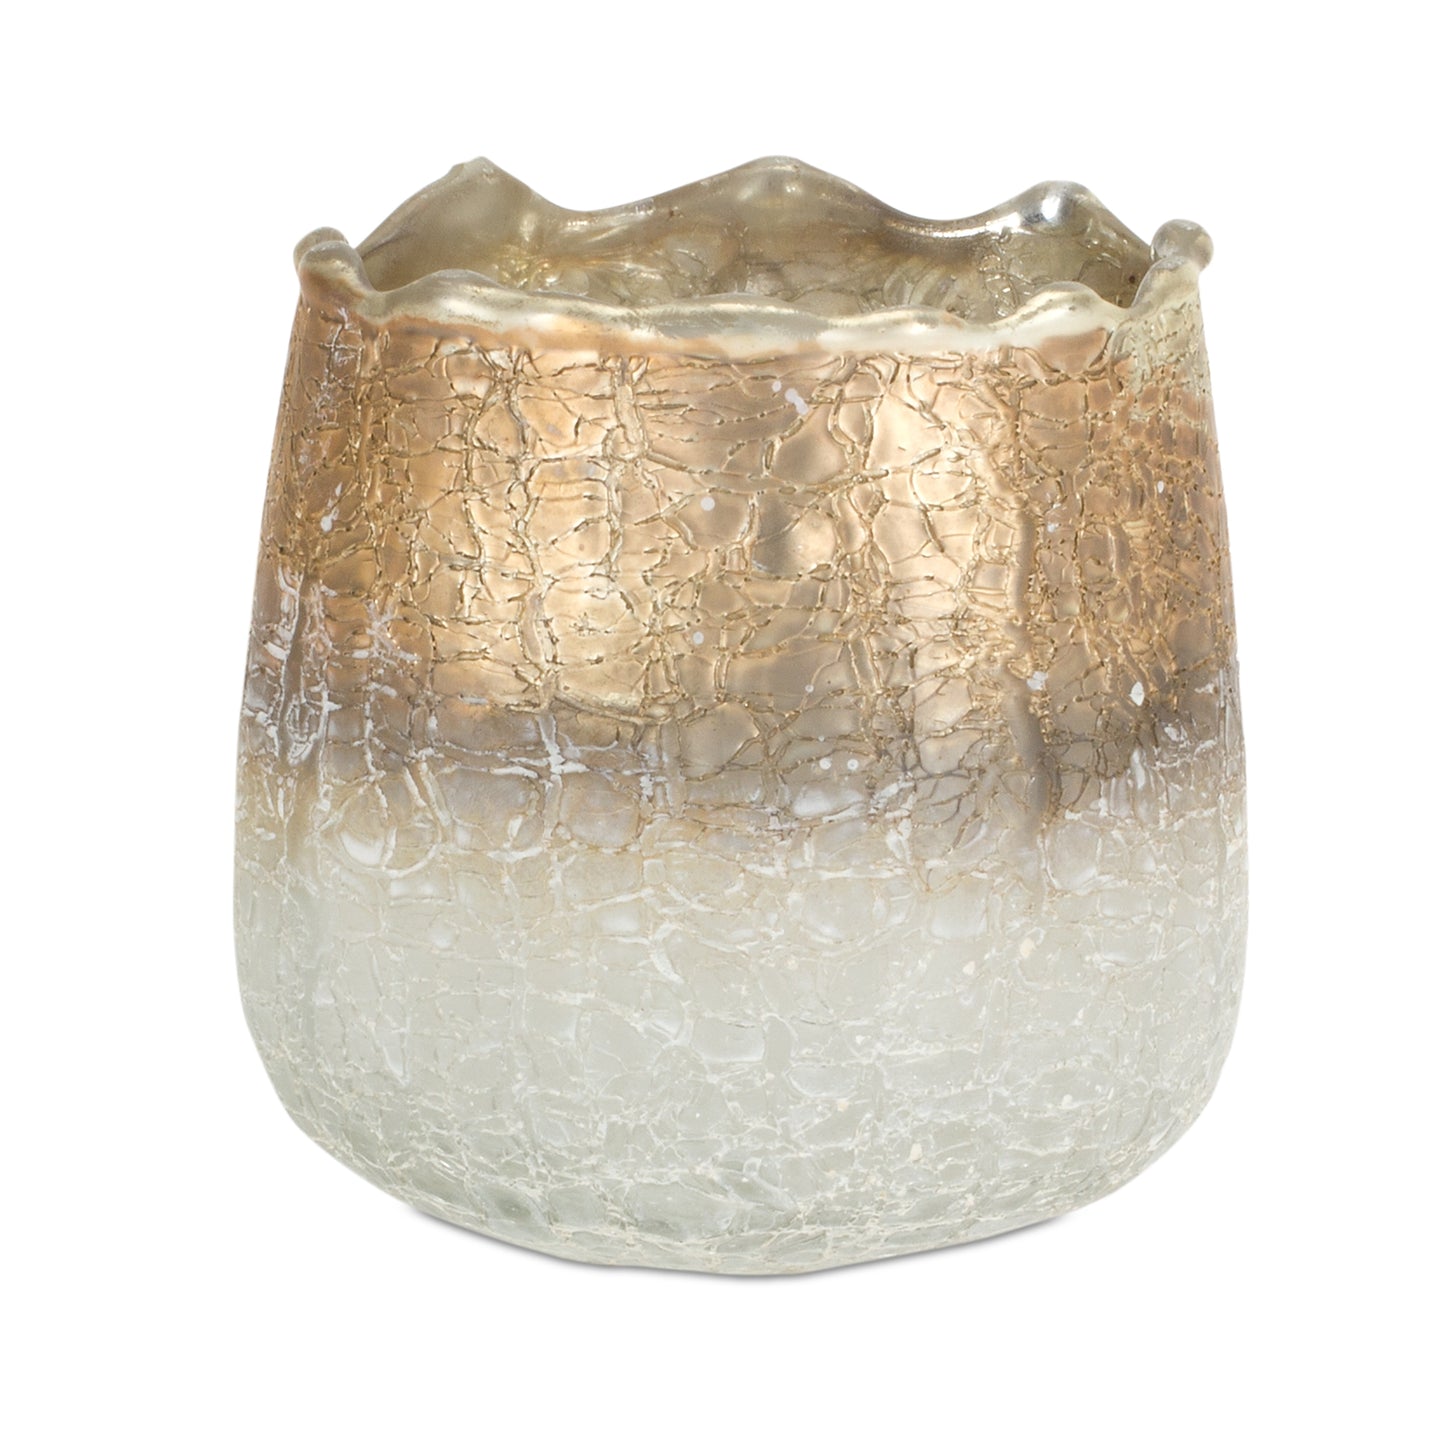 Gold and White Ombre Glass Vase Candle Holder 3.75"H